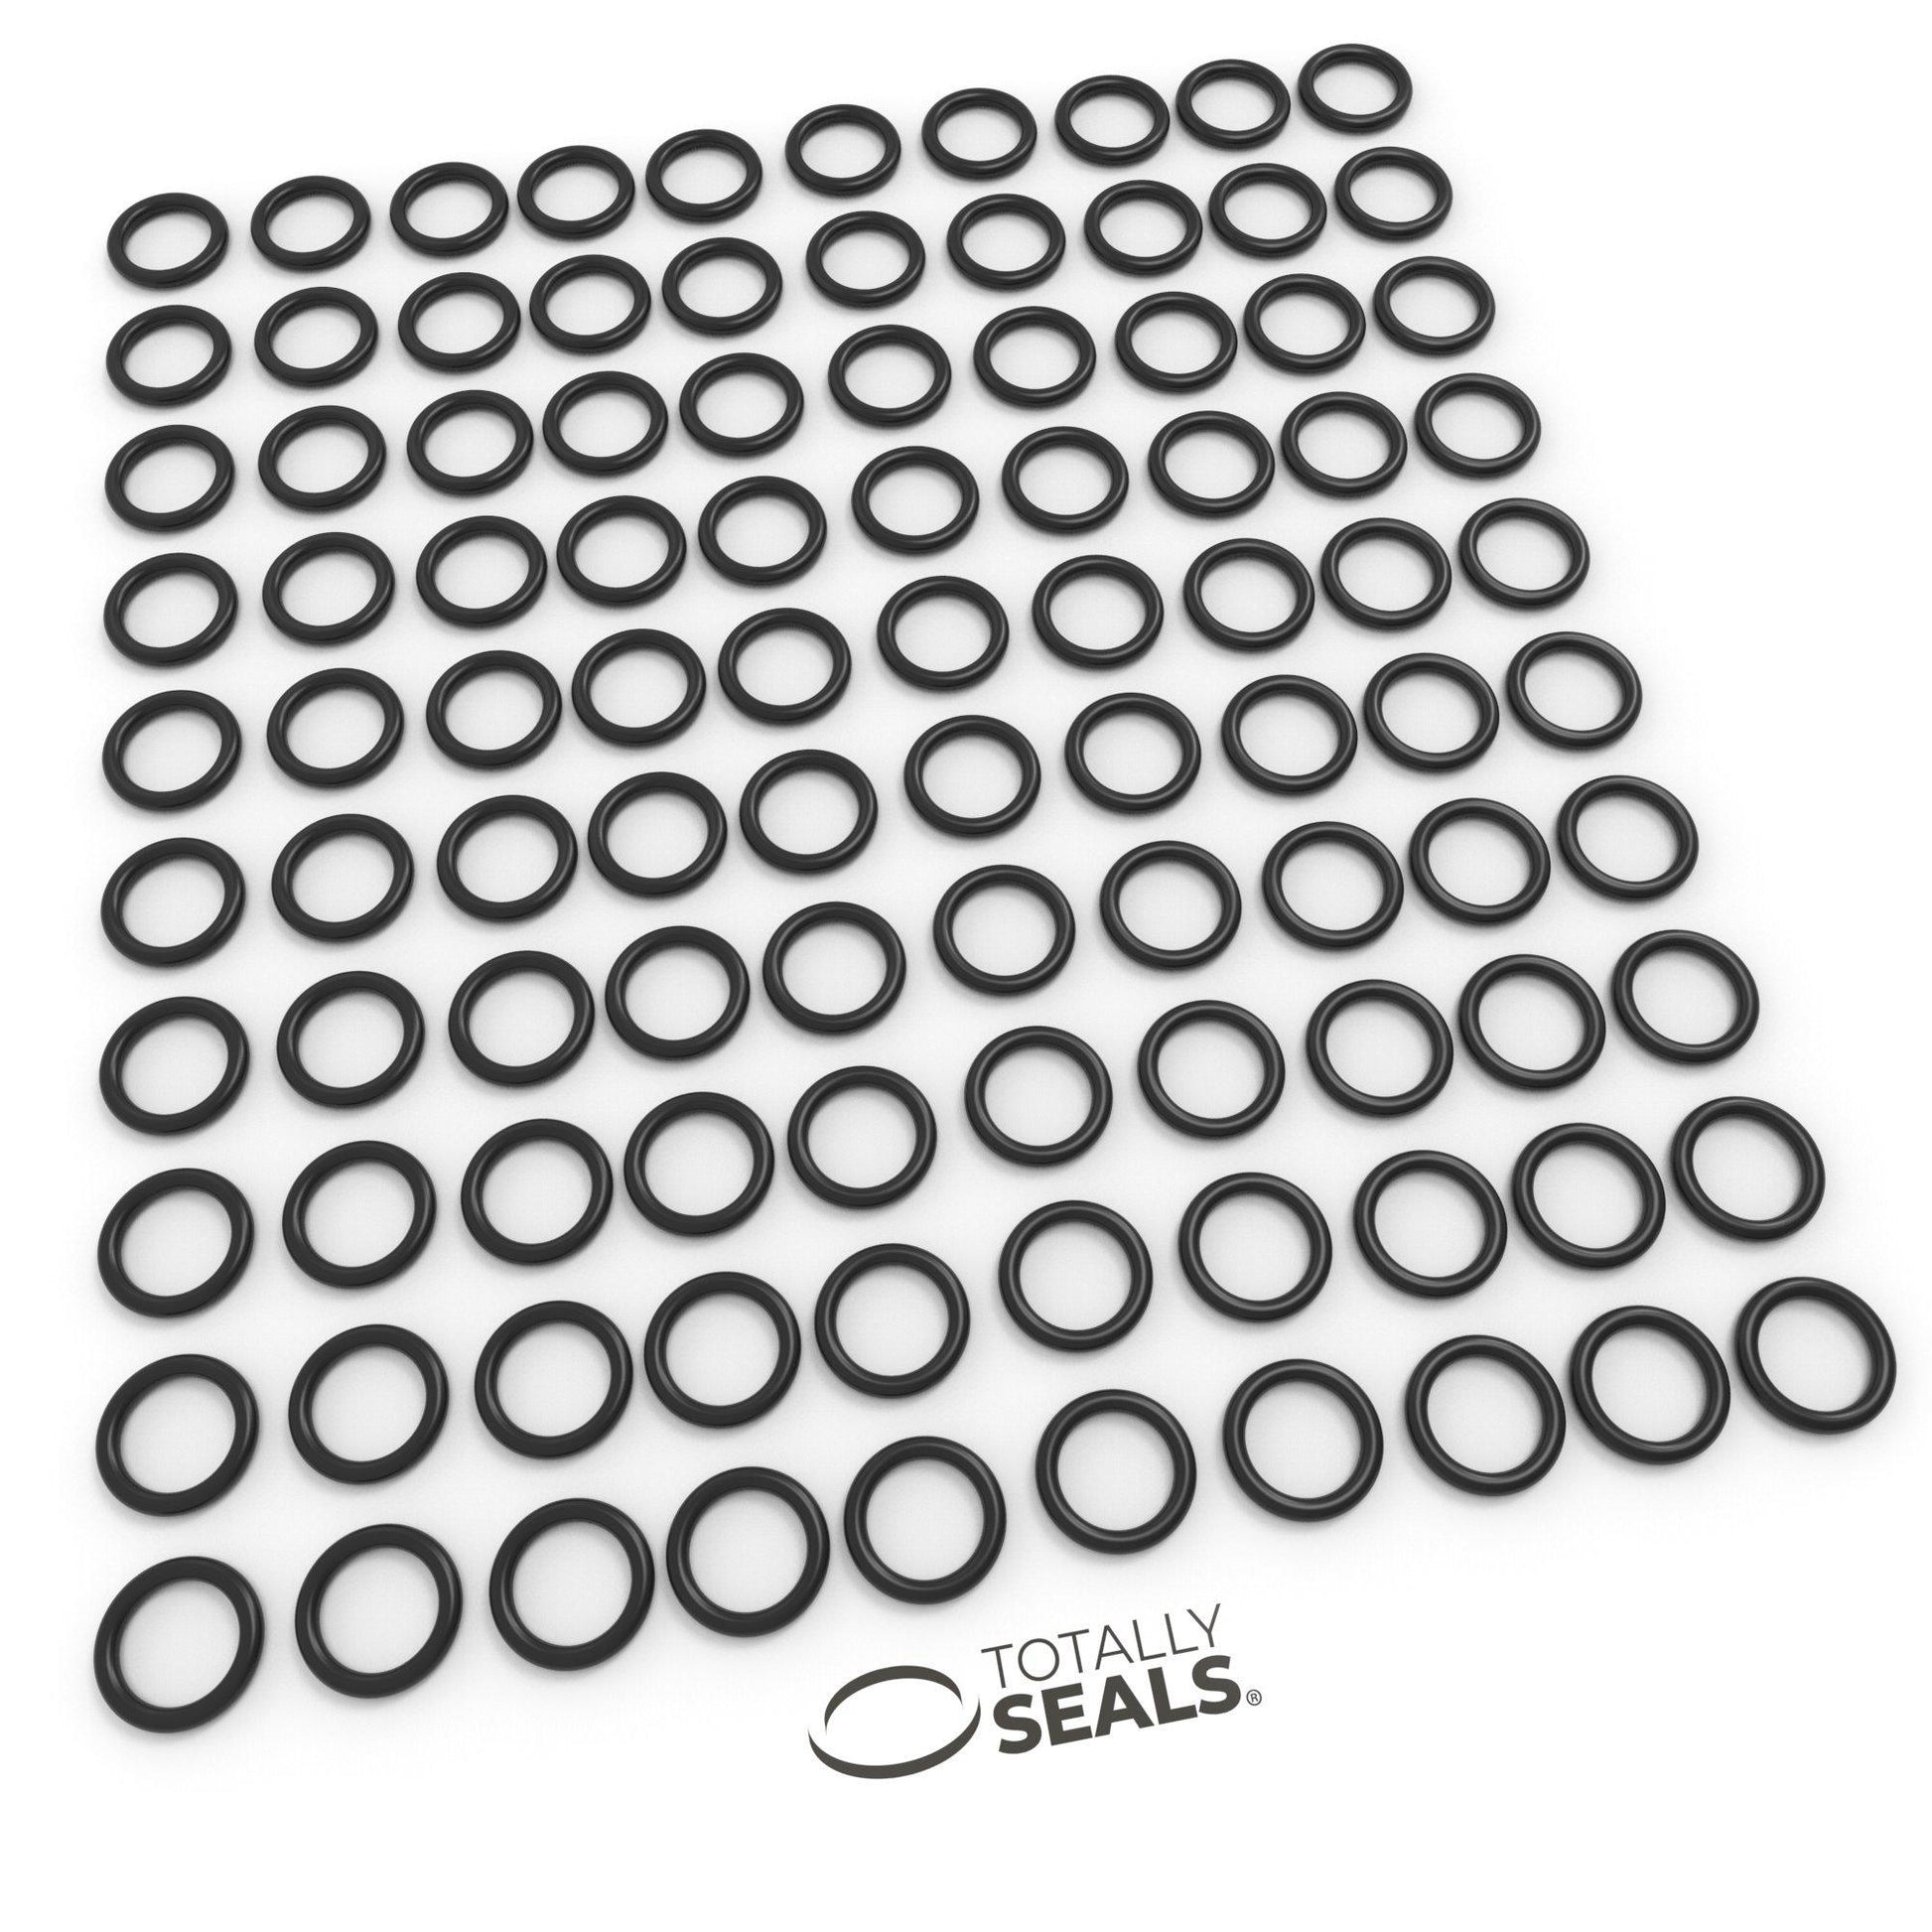 6mm x 2.5mm (11mm OD) Nitrile O-Rings - Totally Seals®